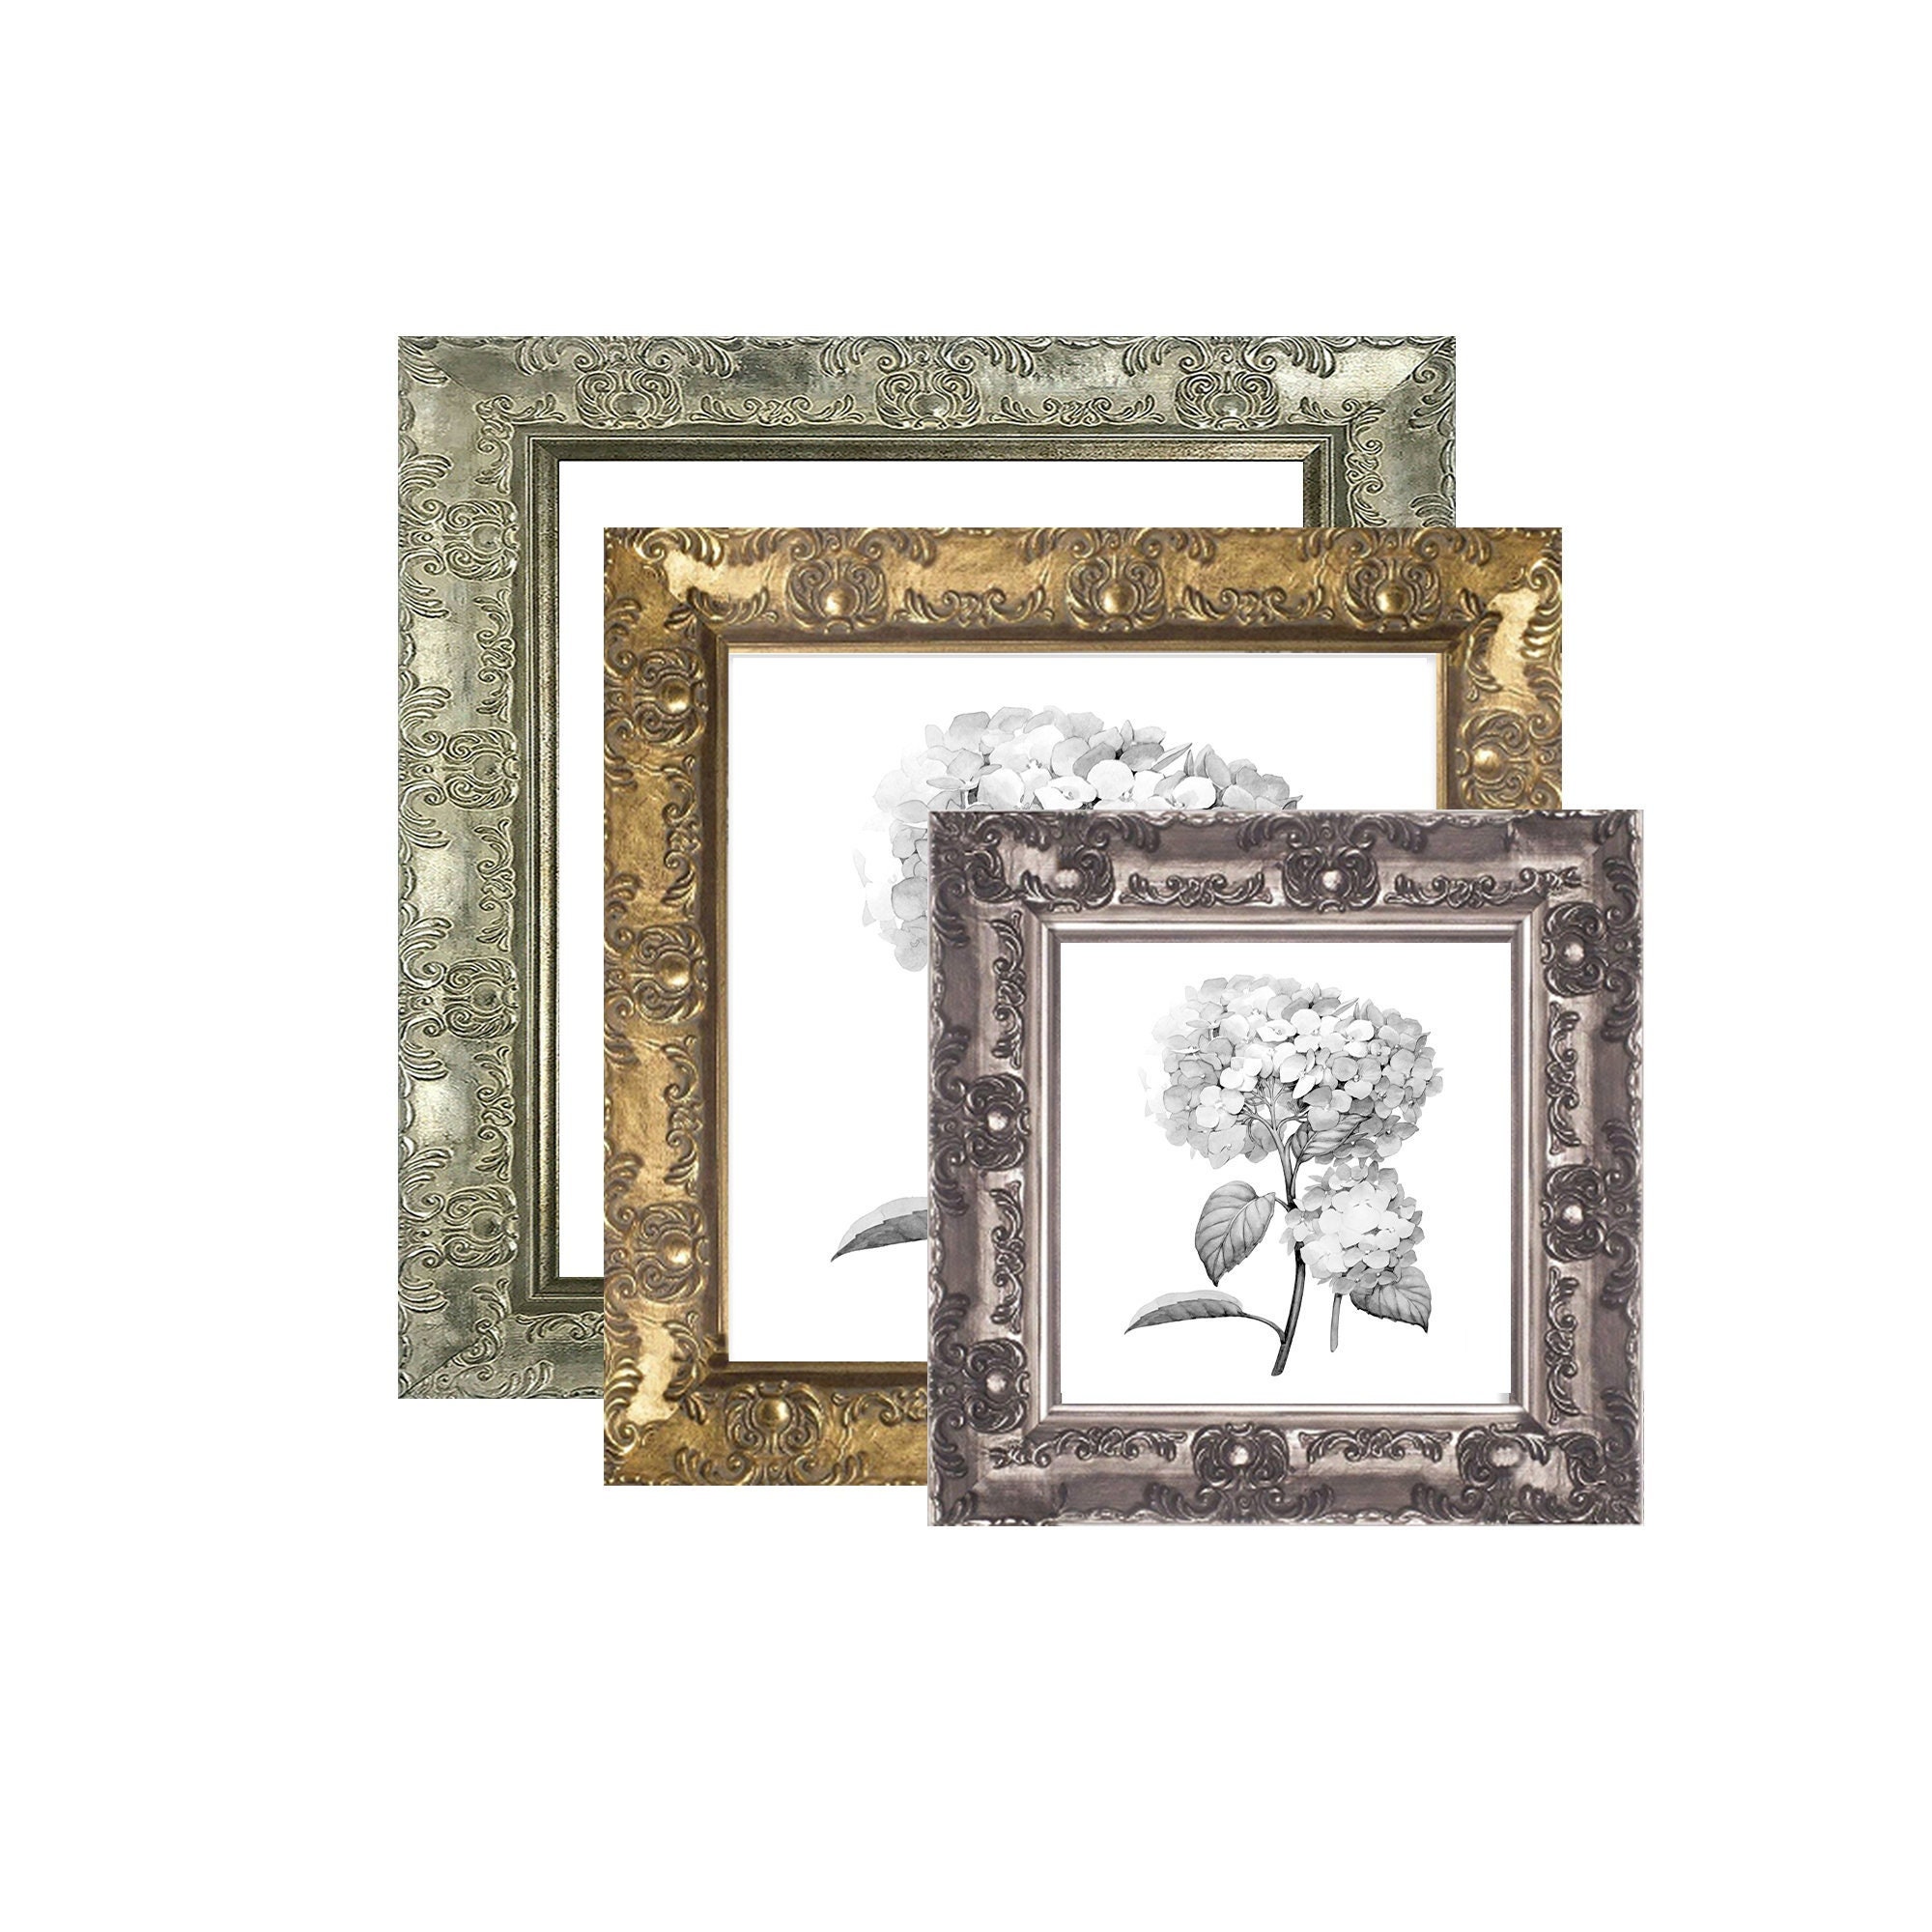 12x12 Frame for 8x8 Picture White Wood (9 Pc per Box)